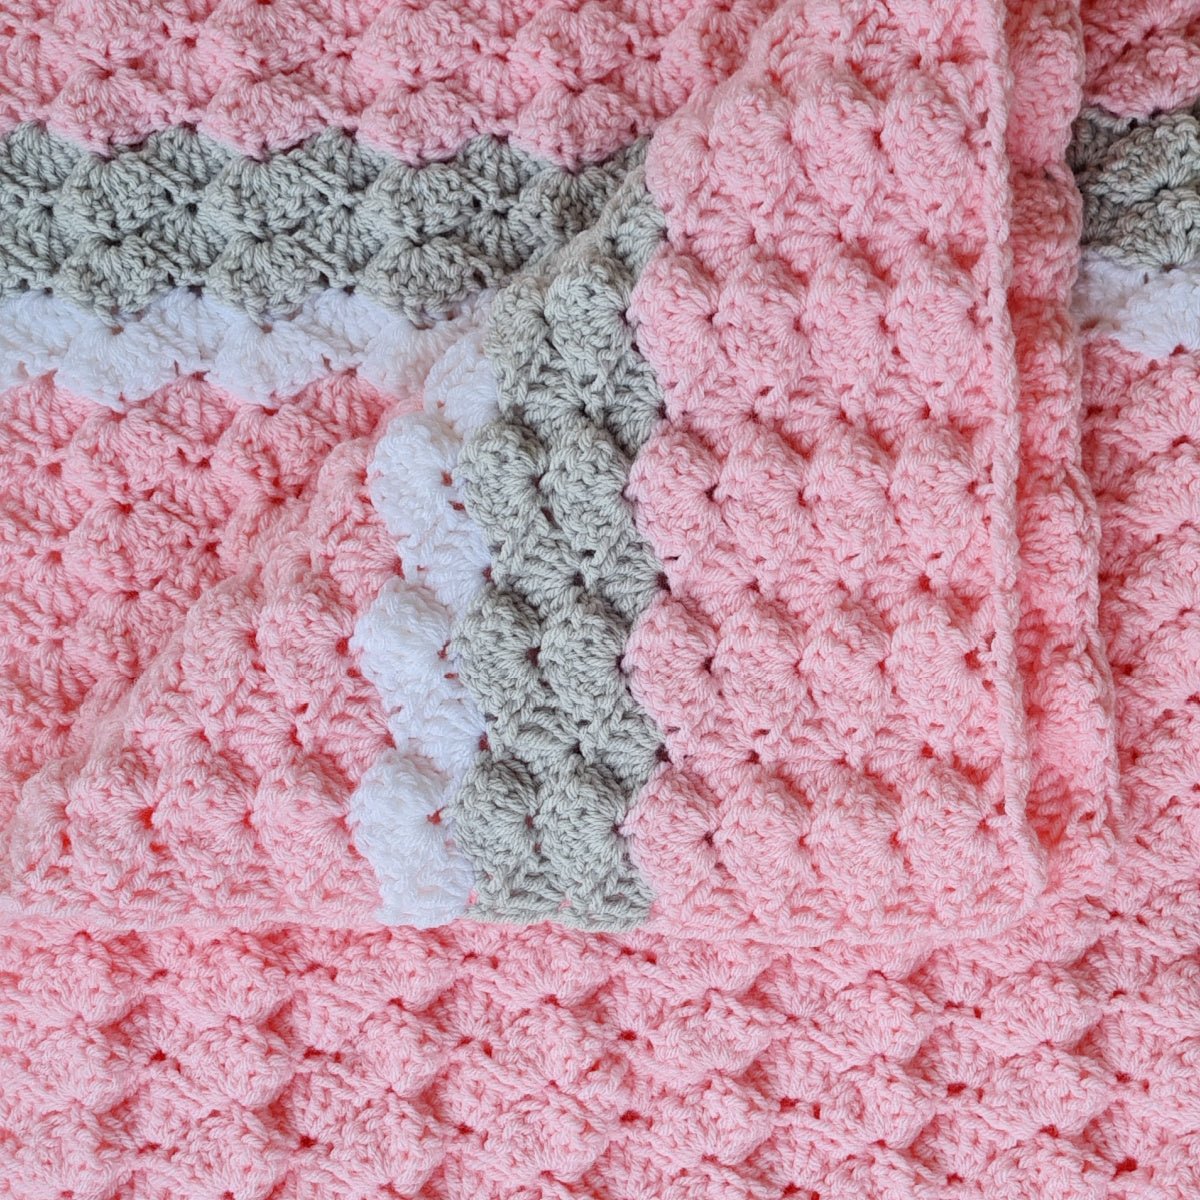 This Crochet 3D Shell Blanket is So Soft and Cozy😲 The Guzzling Granny Crochet Baby Blanket - Secret Yarnery